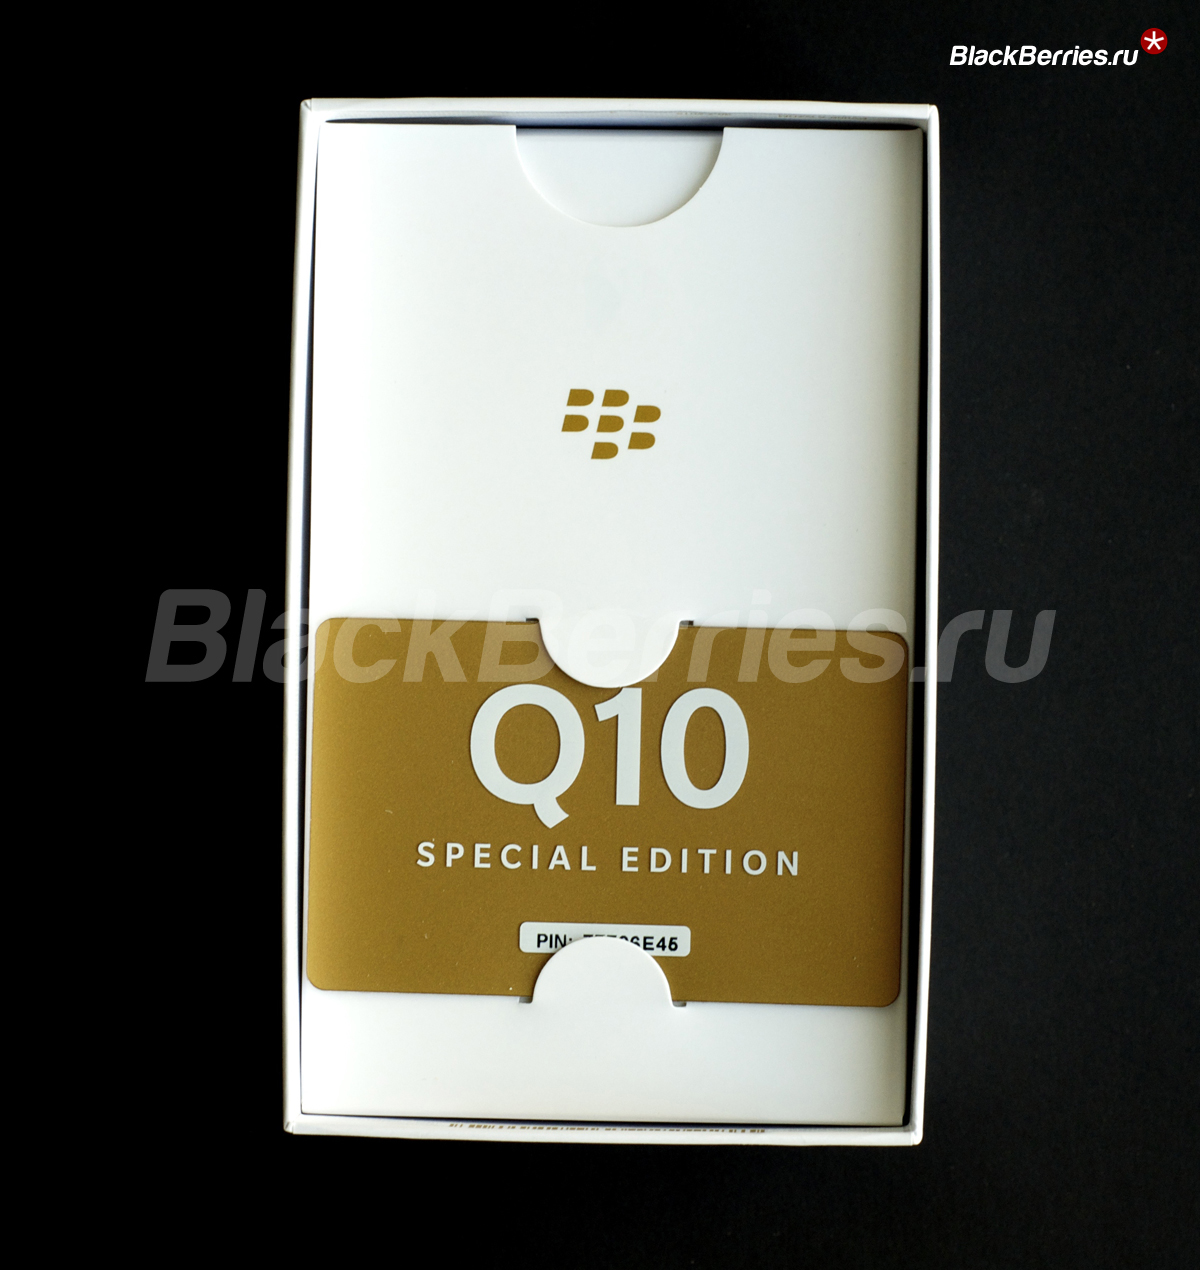 BlackBerry-Q10-Special-Edition-90